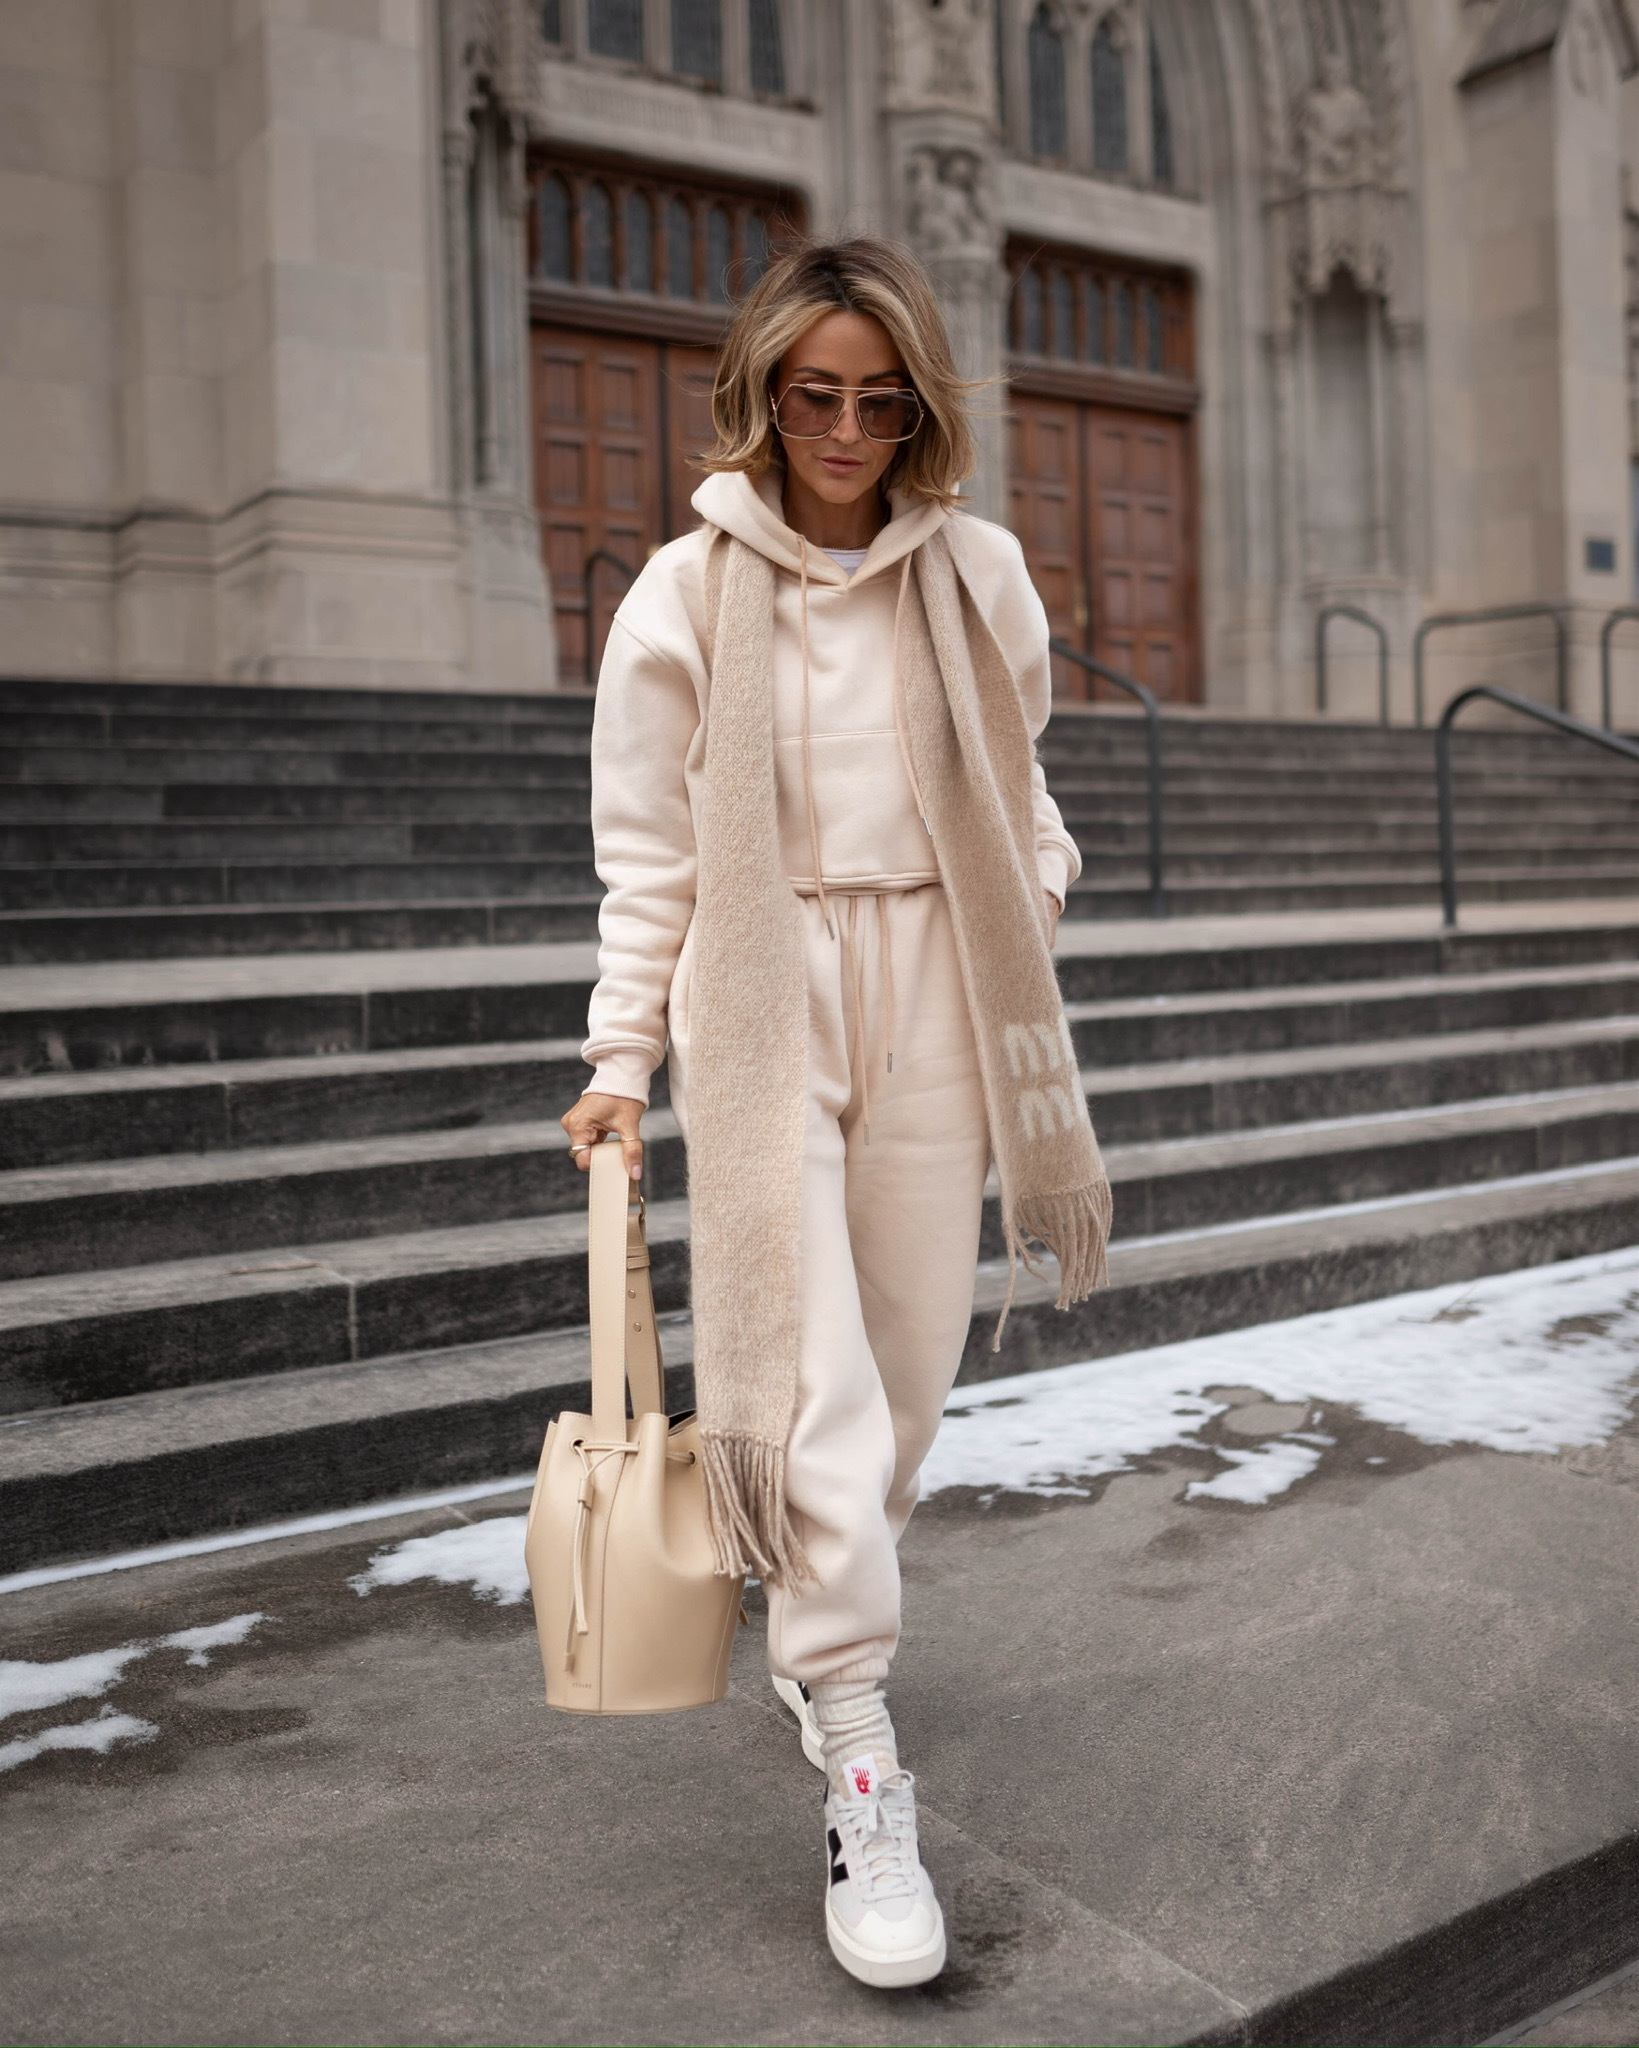 20+ Ways To Style White Jeans For ALL Seasons